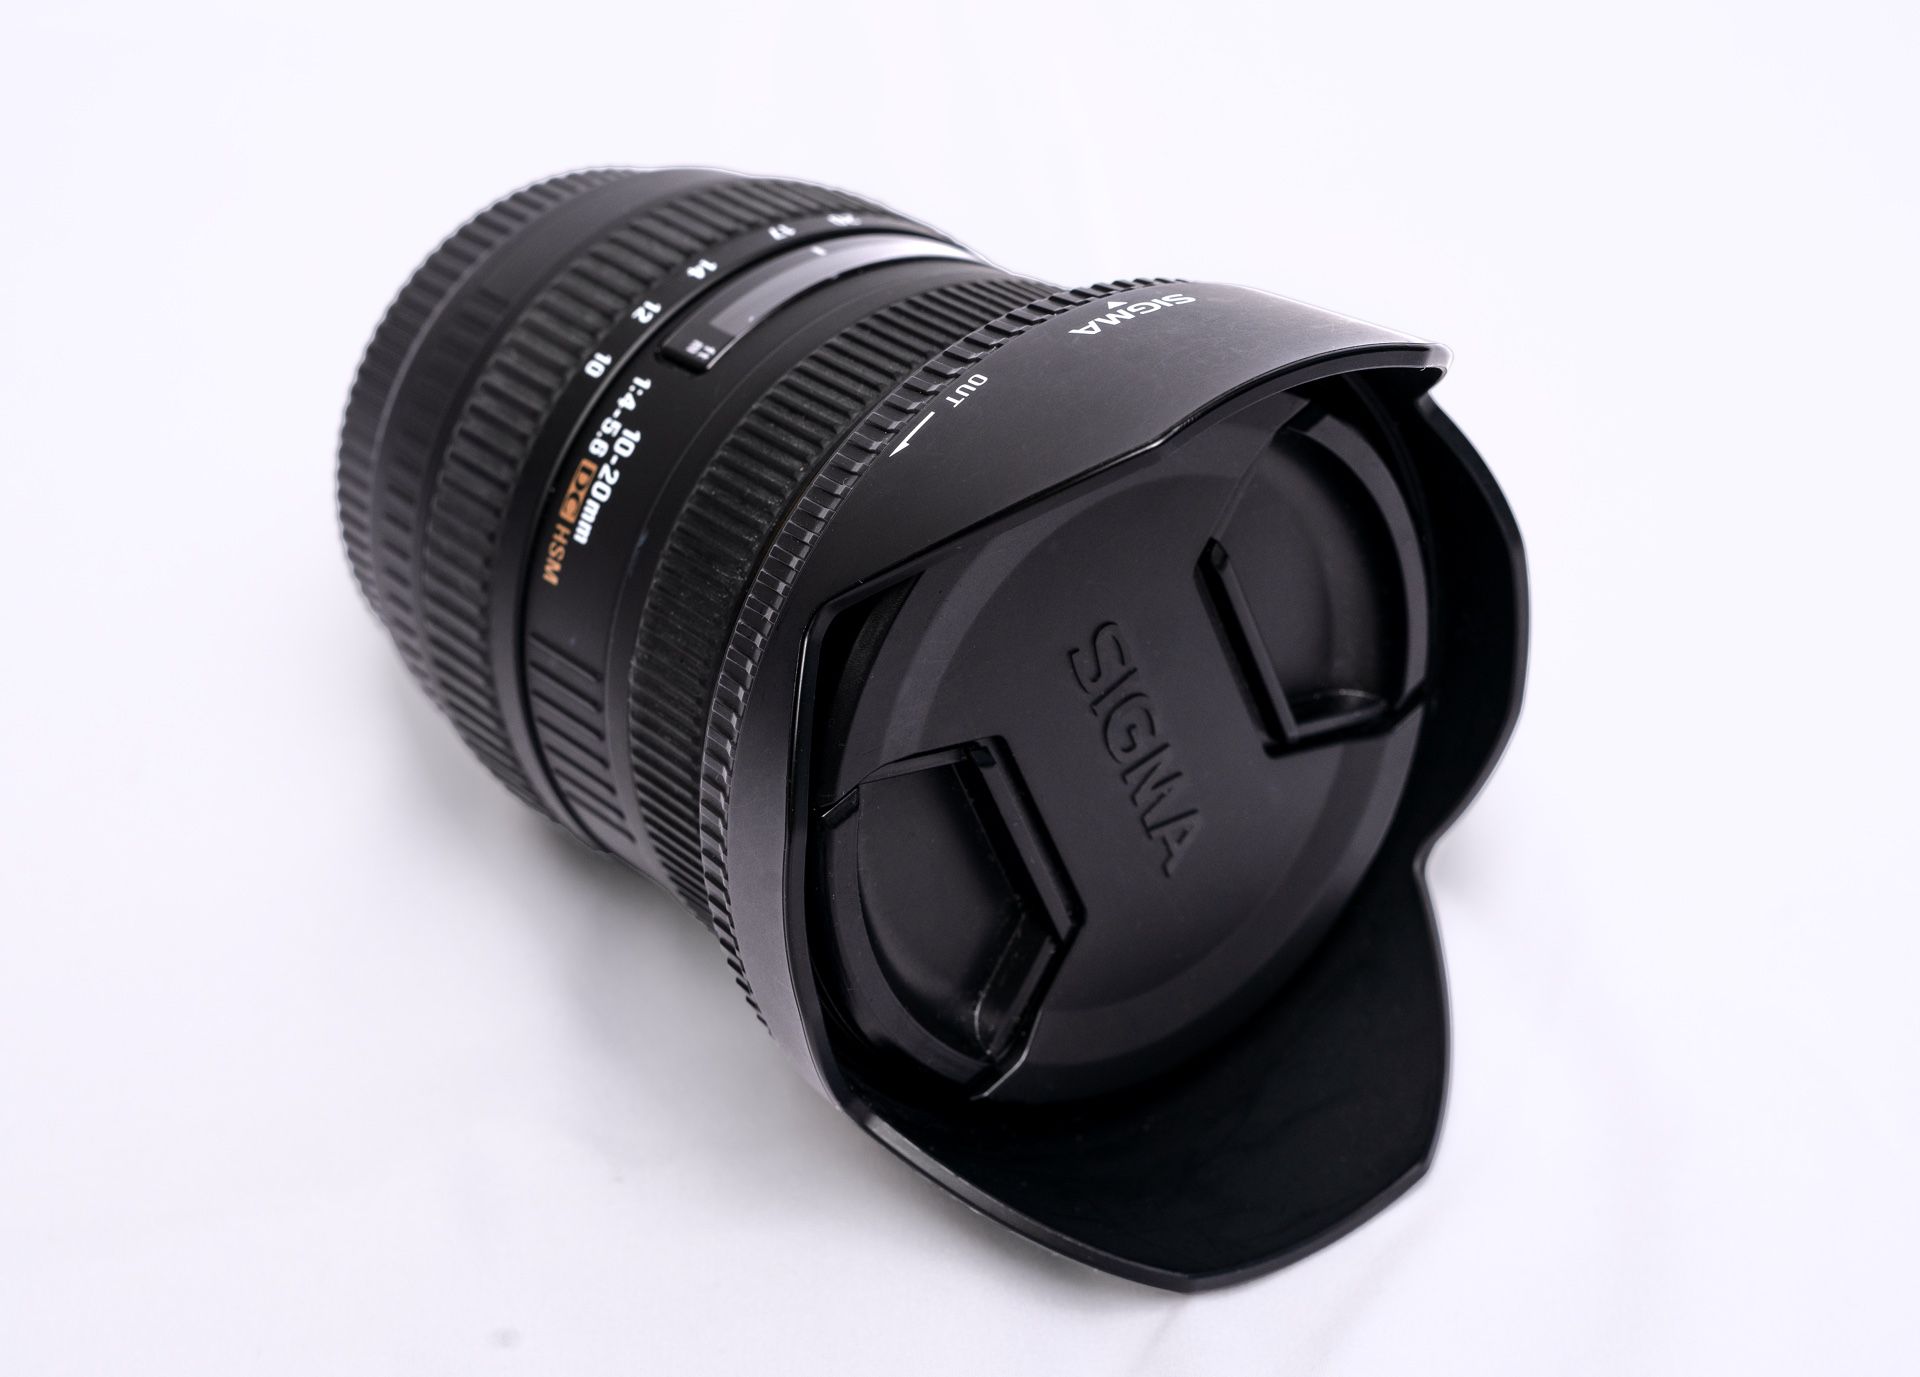 Sigma Lens For Canon 10-20 mm F4